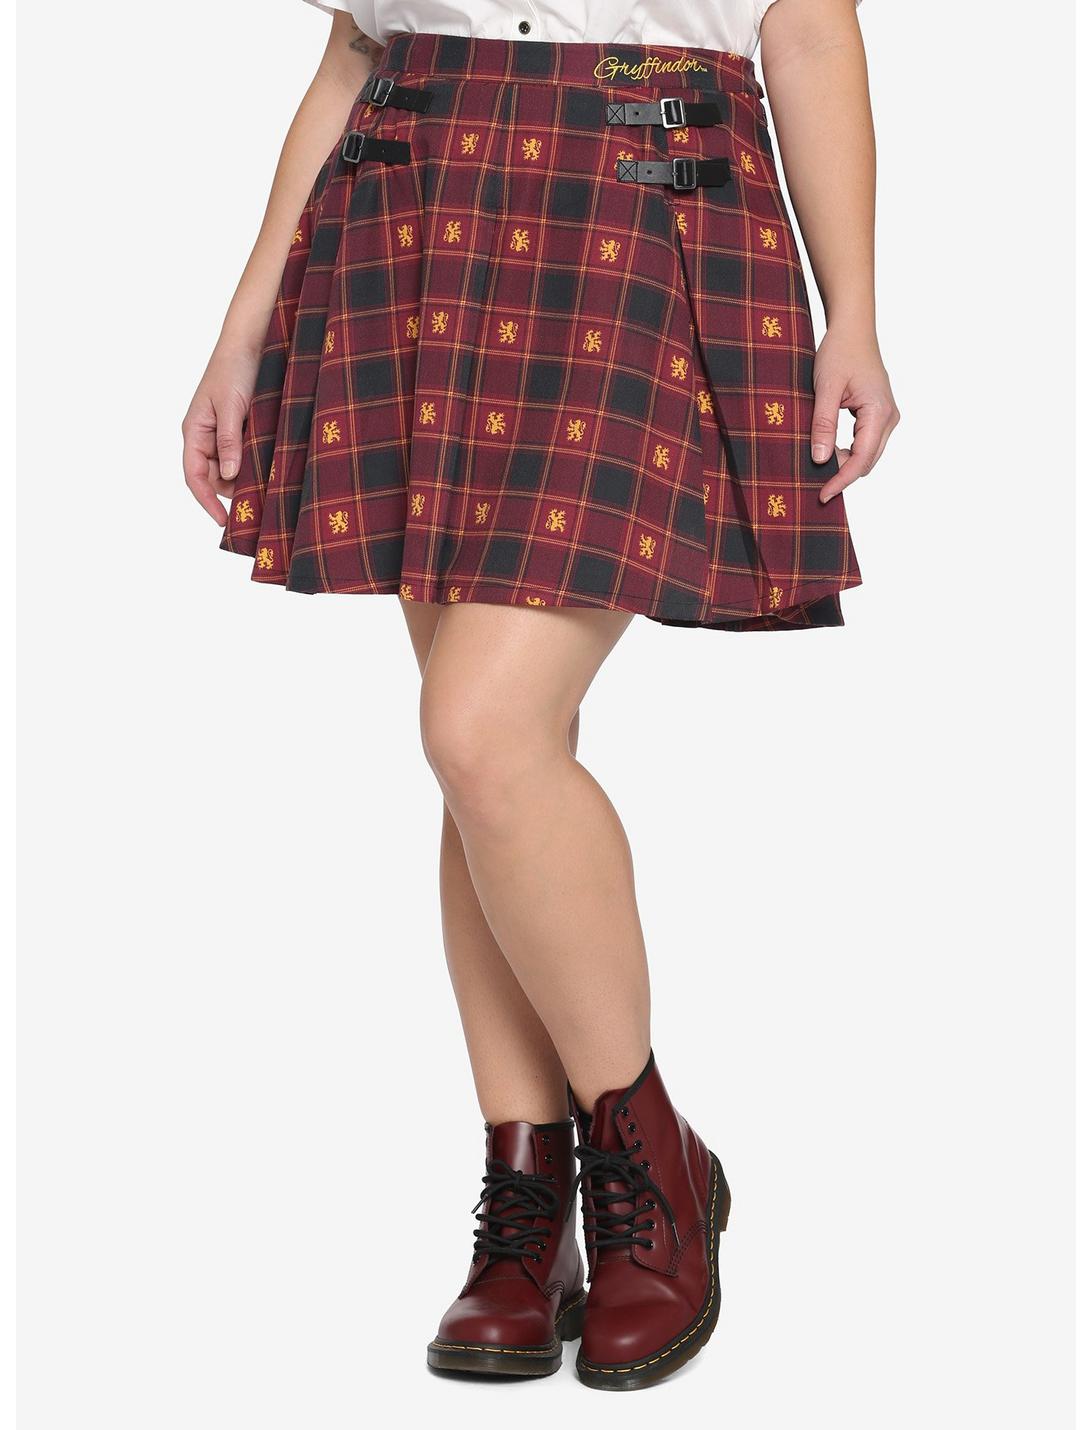 Harry Potter Gryffindor Plaid Pleated Skirt Plus Size | Hot Topic